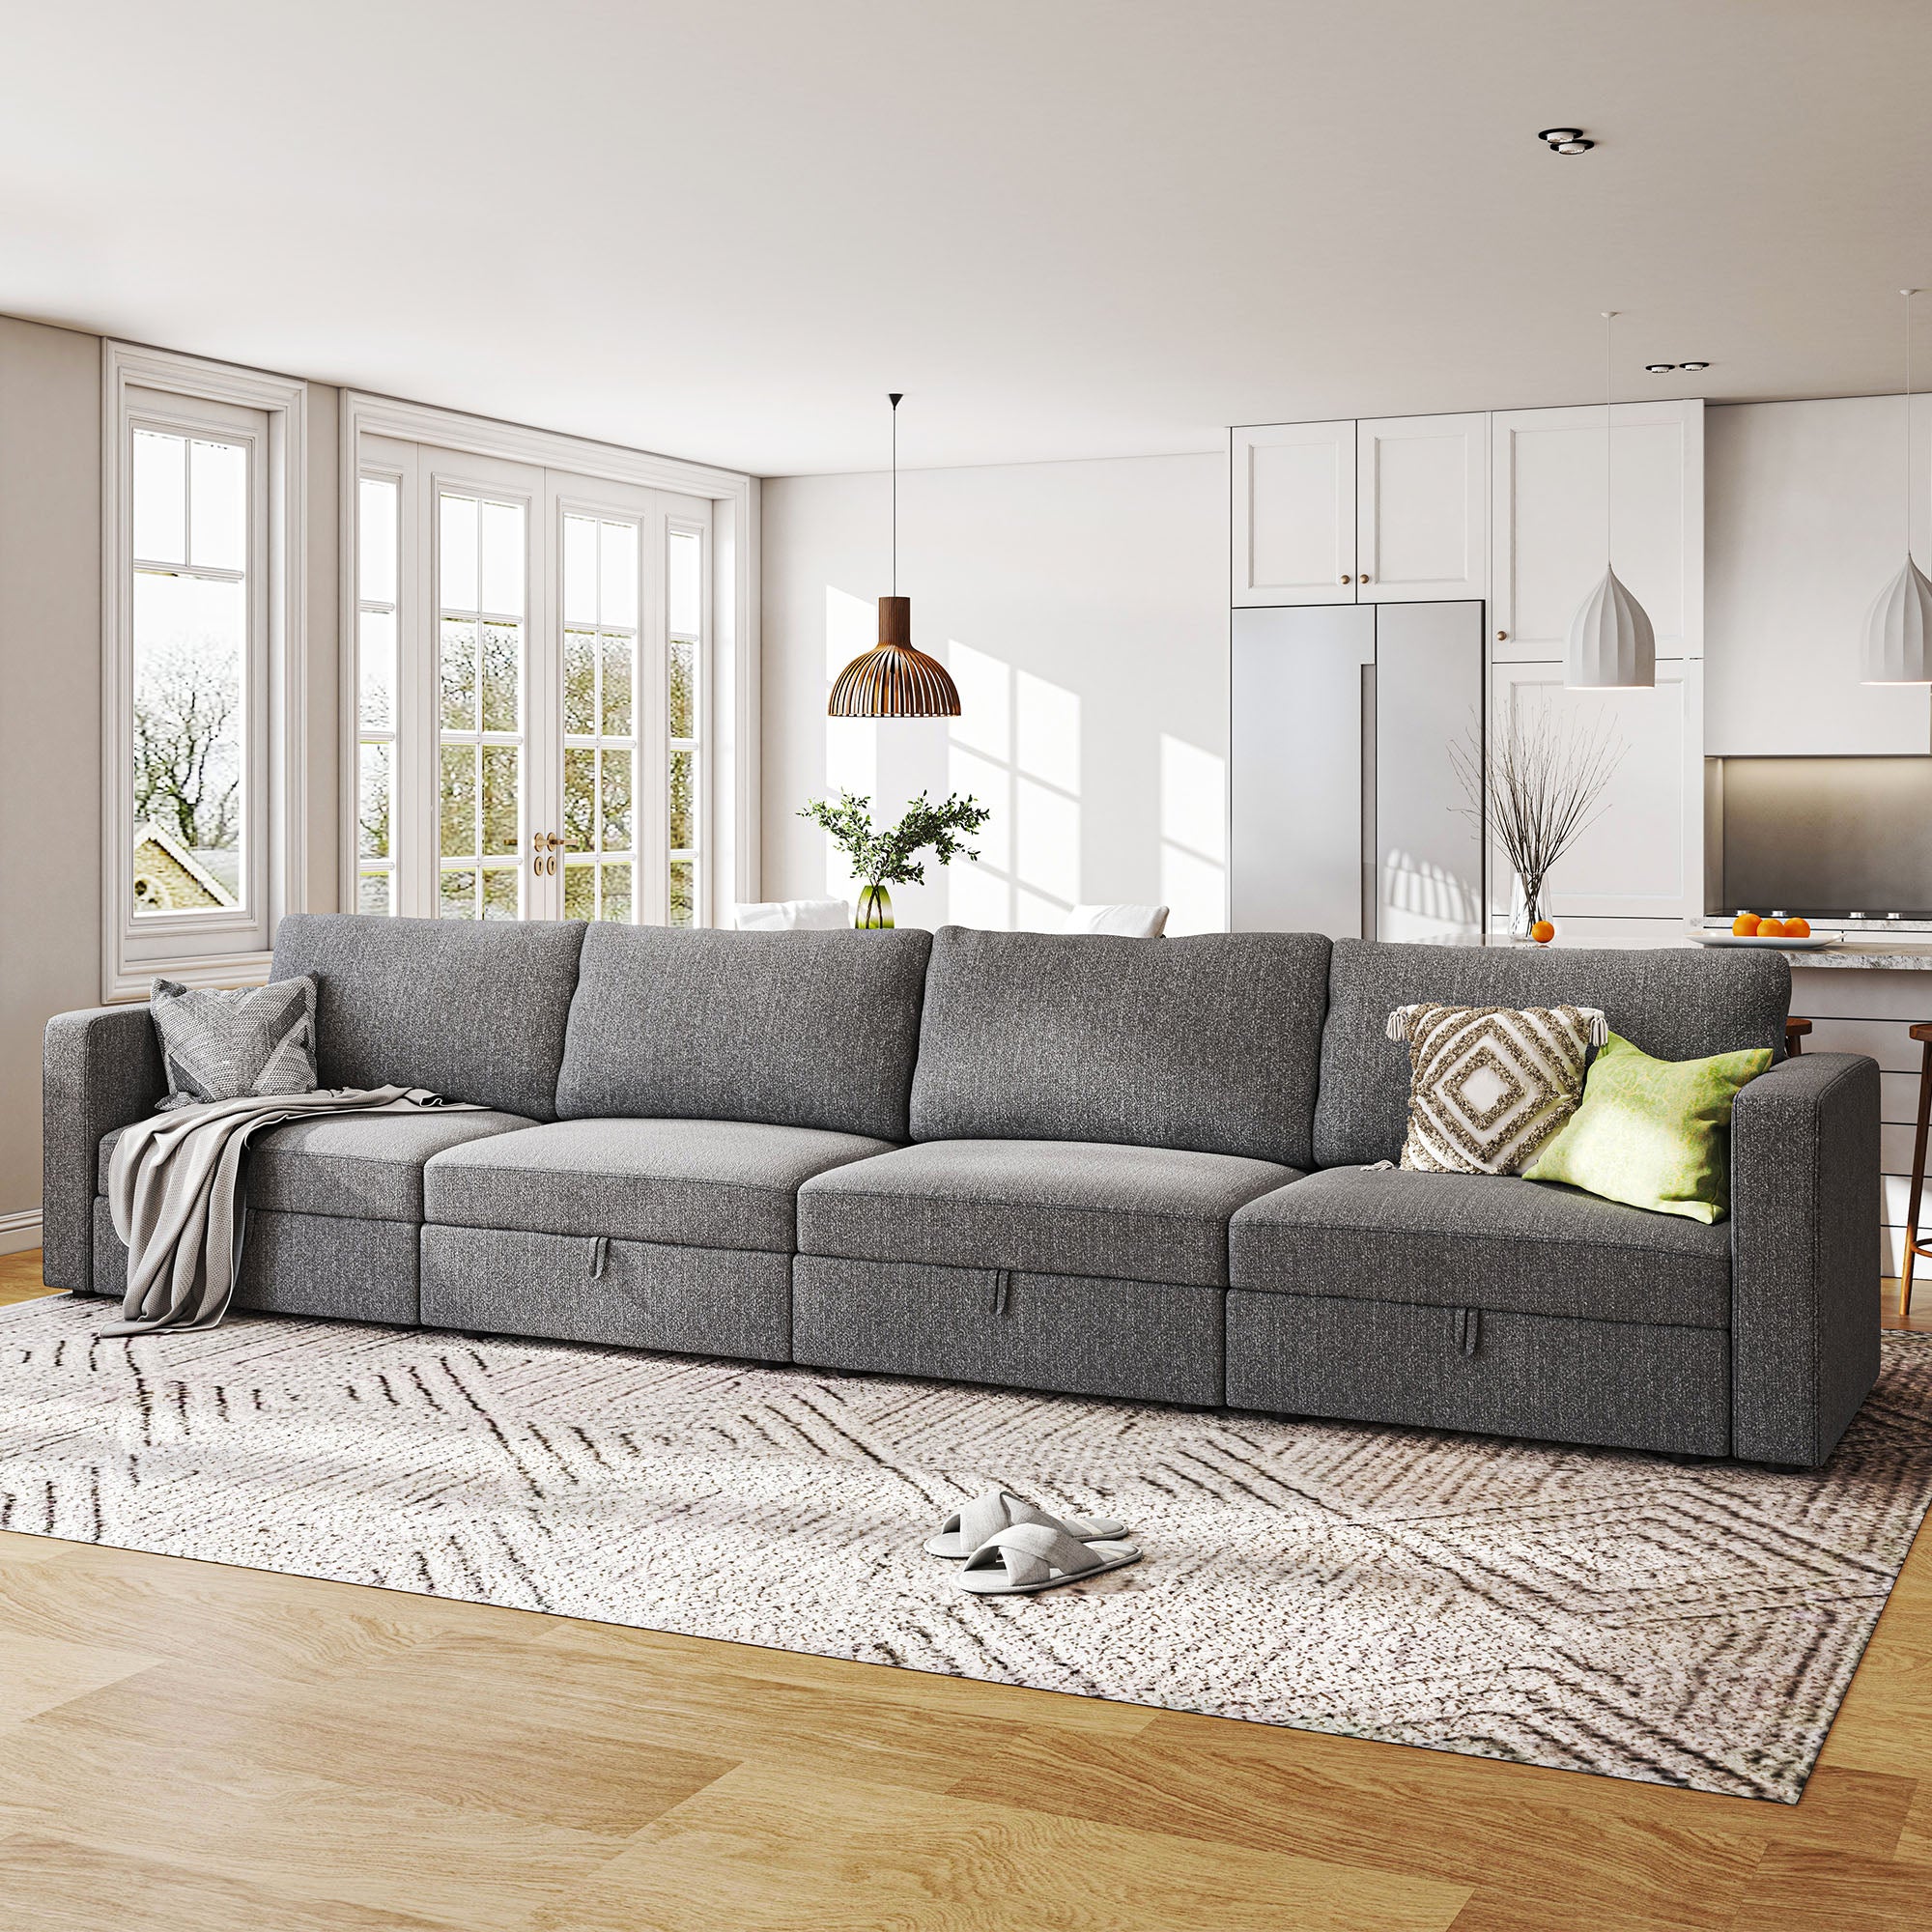 HONBAY Linen Grey Fabric Premium 4 Seaters Storage Modular Sectional Sofa for Living Room